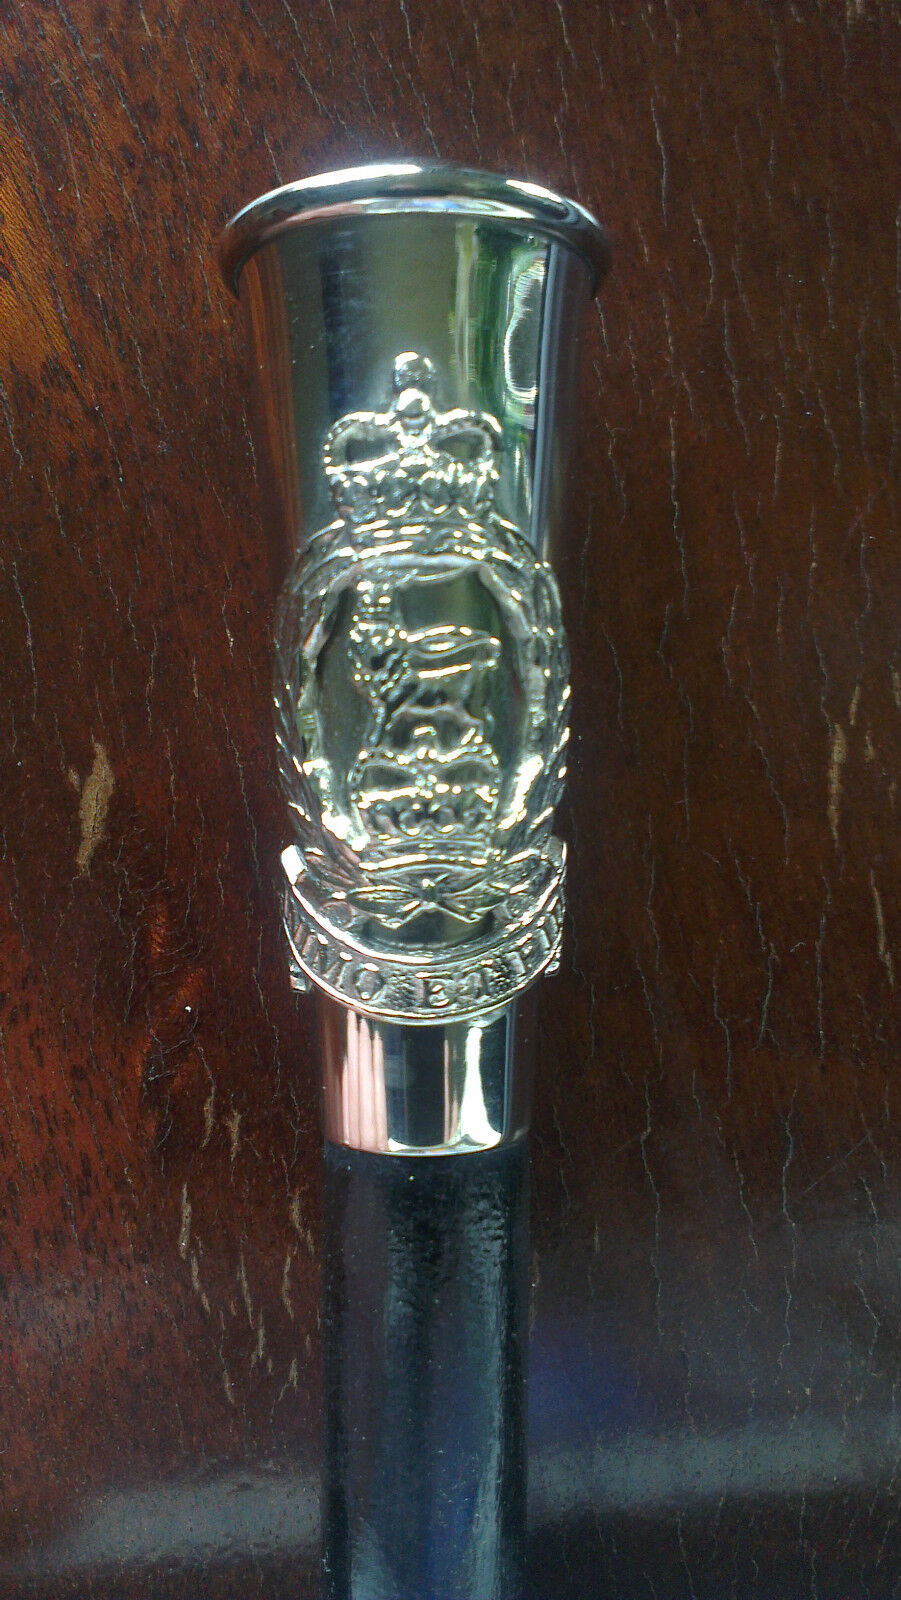 Adutant Generals Corps Swagger Stick